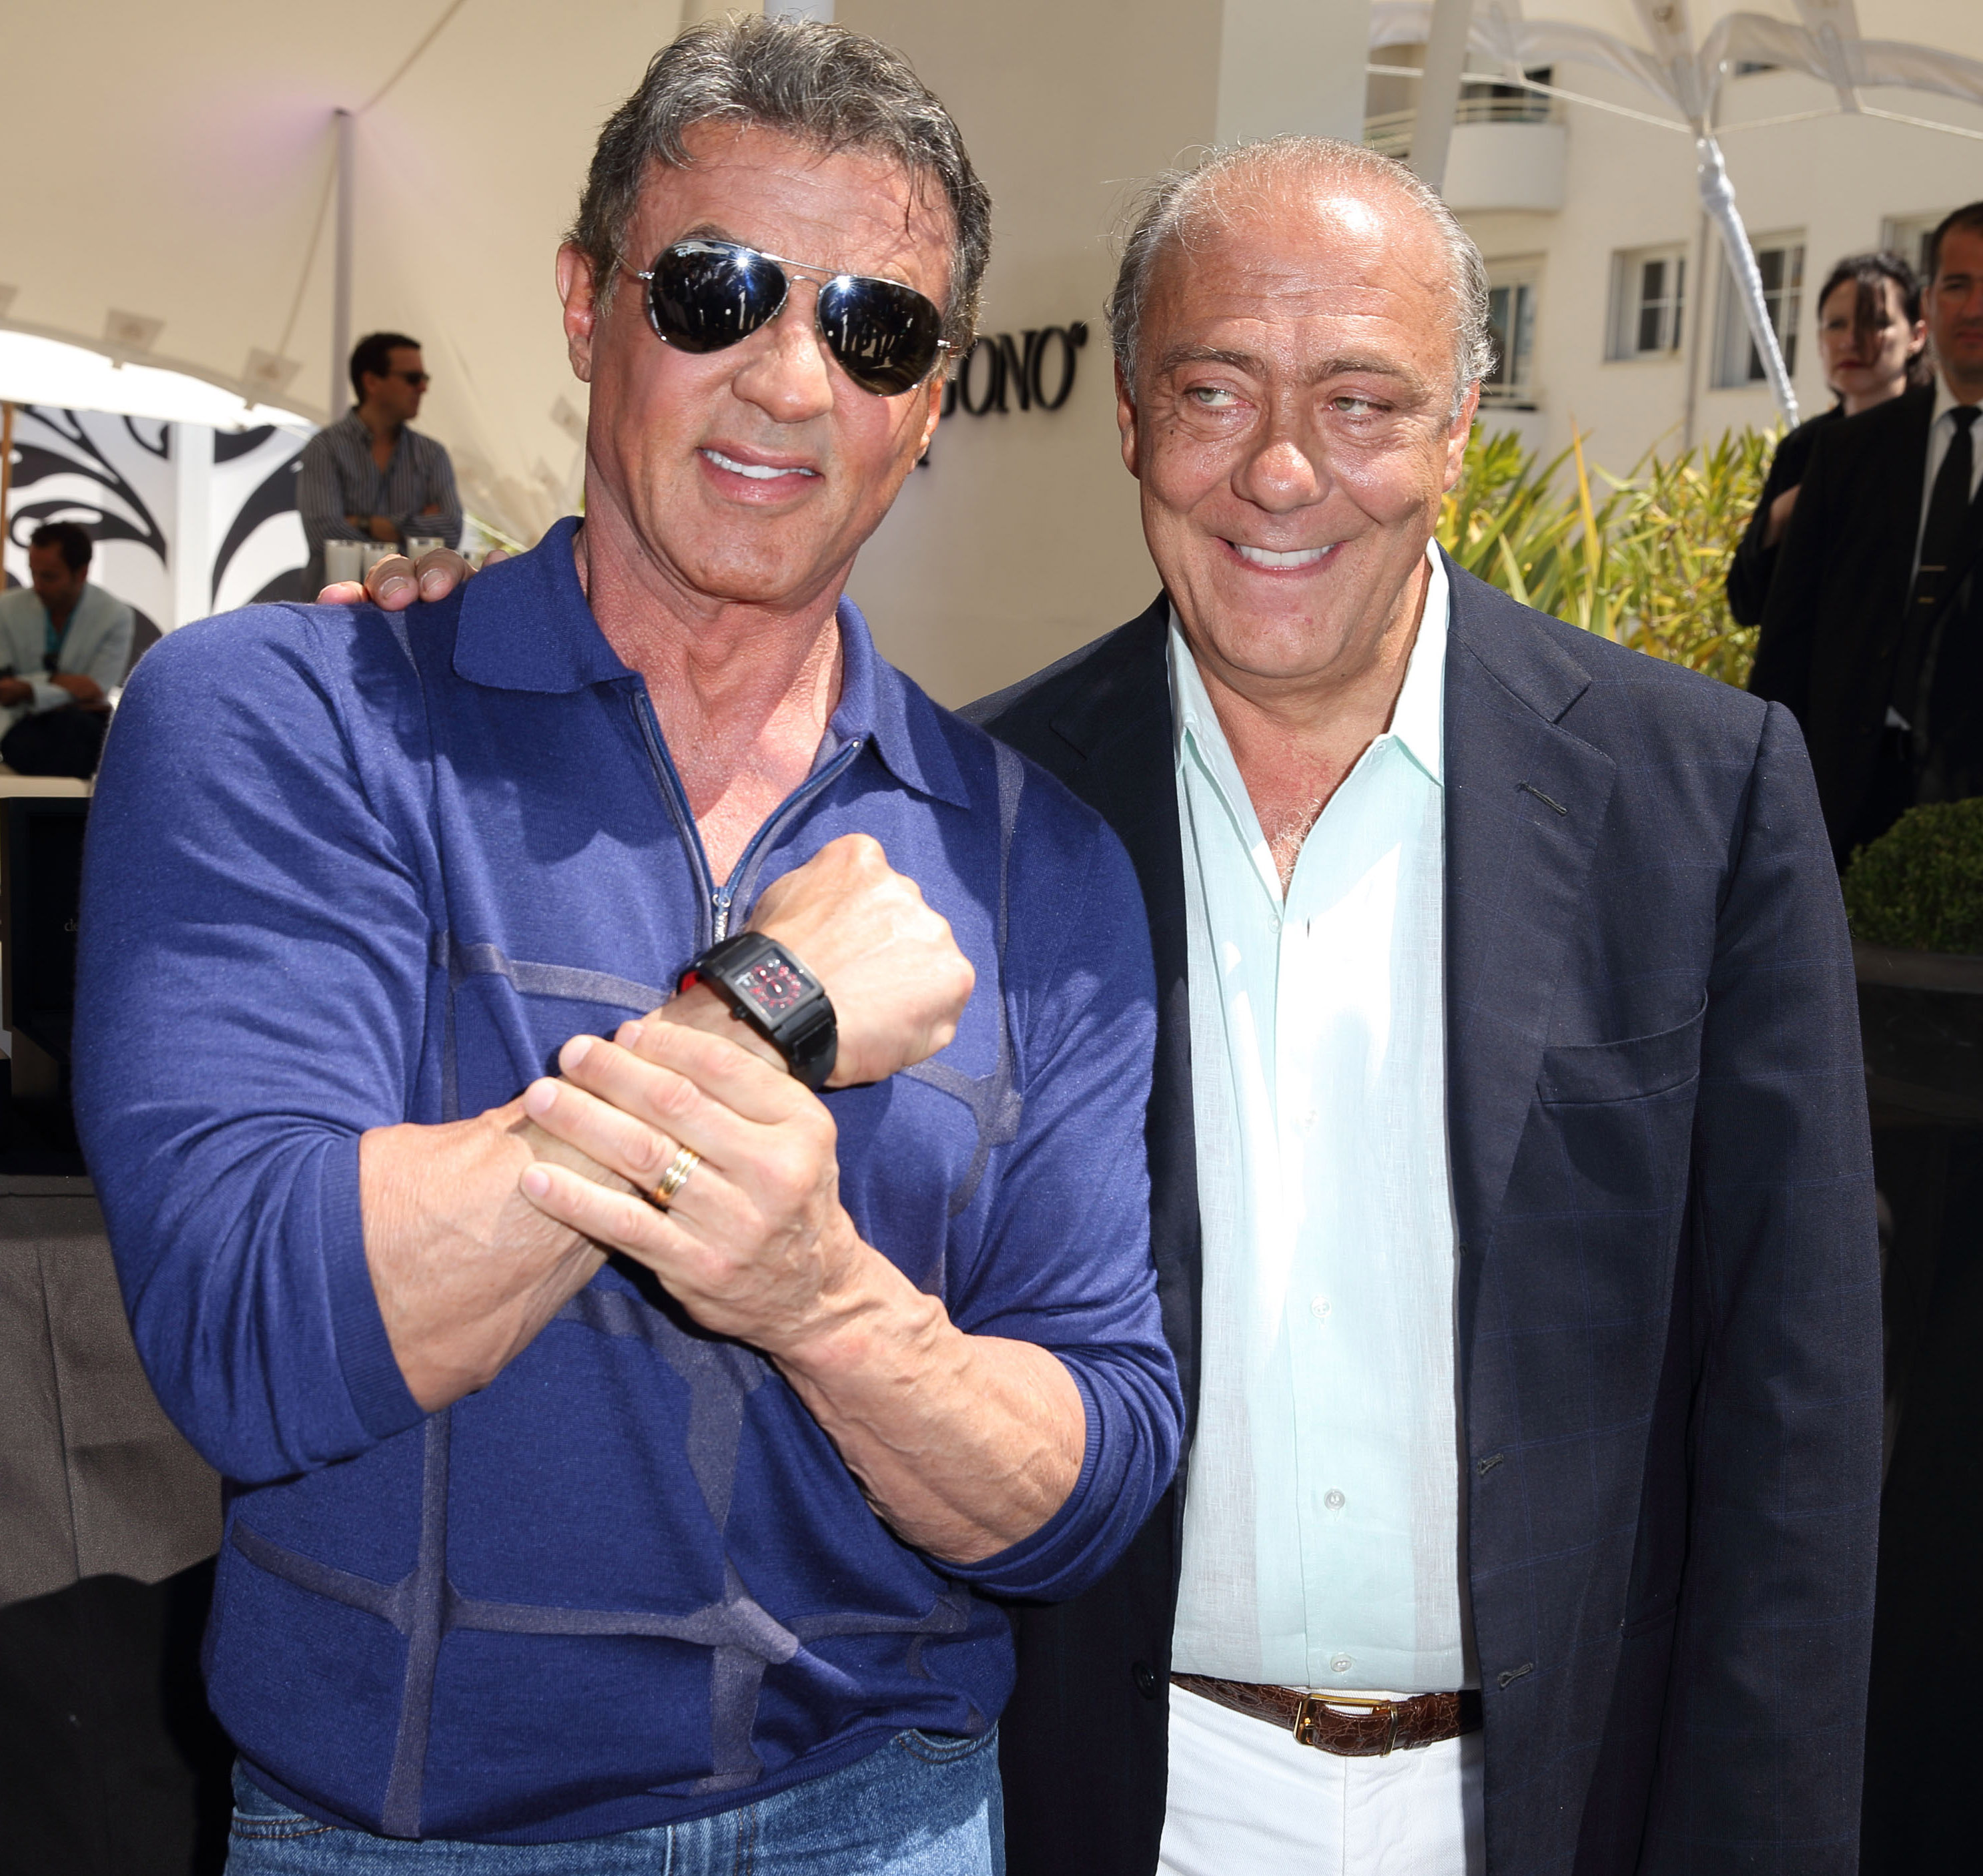 "Expendables 3" : Lunch At The Martinez - The 67th Annual Cannes Film Festival